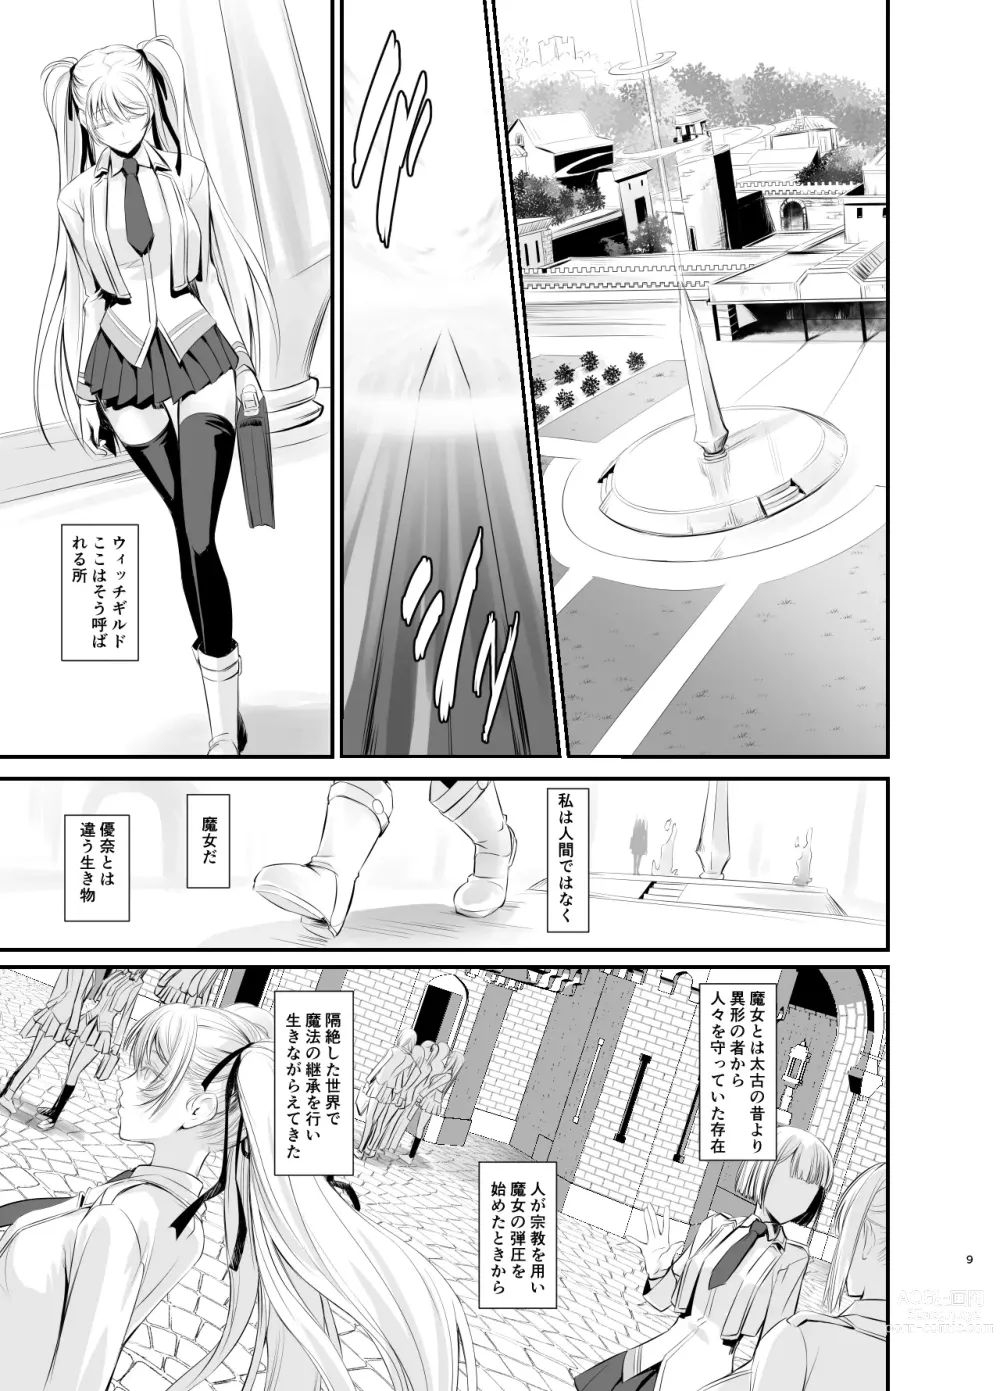 Page 10 of doujinshi Witch Guild